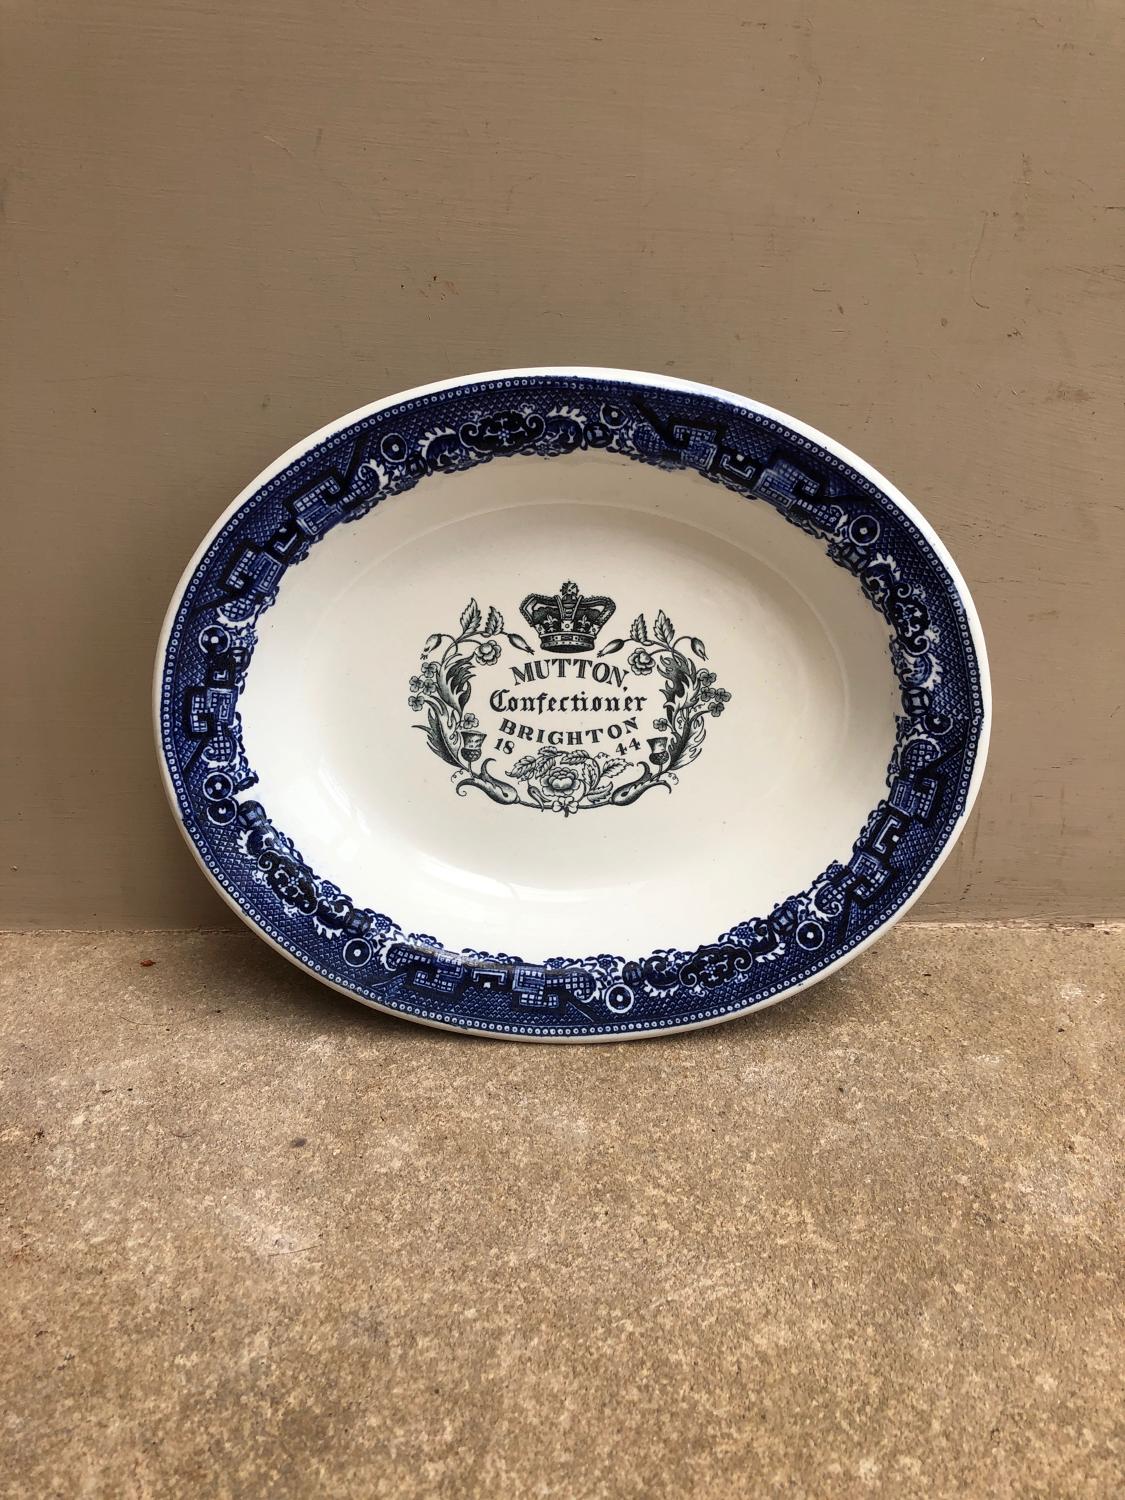 Early Victorian Confectioners Advertising Dish Dated 1844